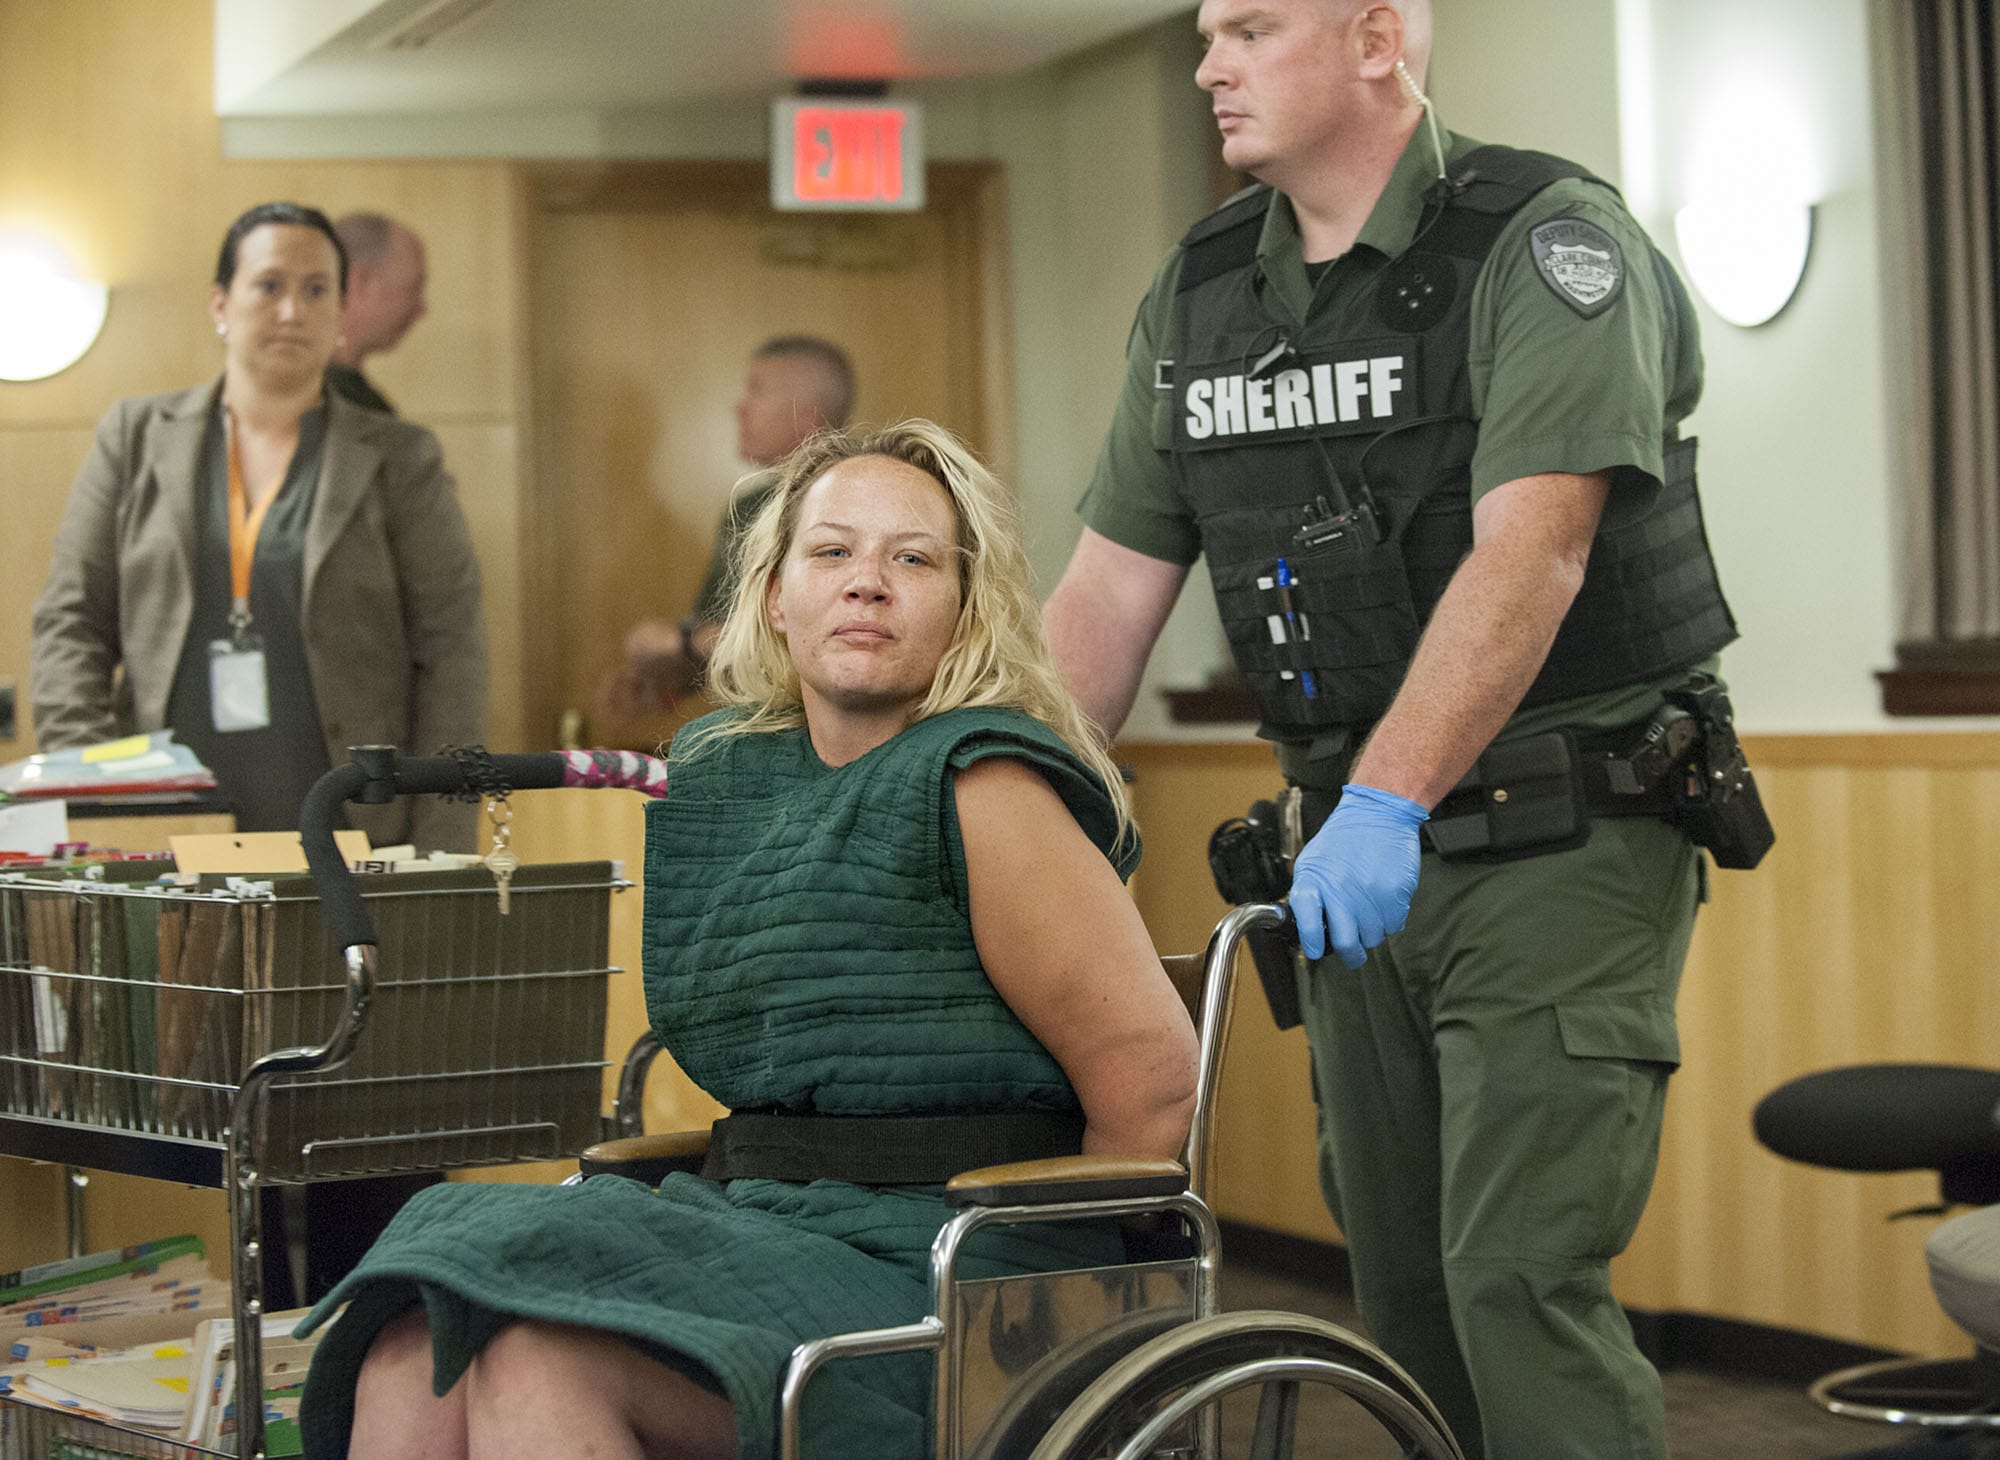 Jessica Farias, 33, of Vancouver makes a first appearance Tuesday in Clark County Superior Court. Farias is accused of driving erratically through Hazel Dell on Monday morning and then reaching for a deputy's gun, causing it to fire, while resisting arrest.